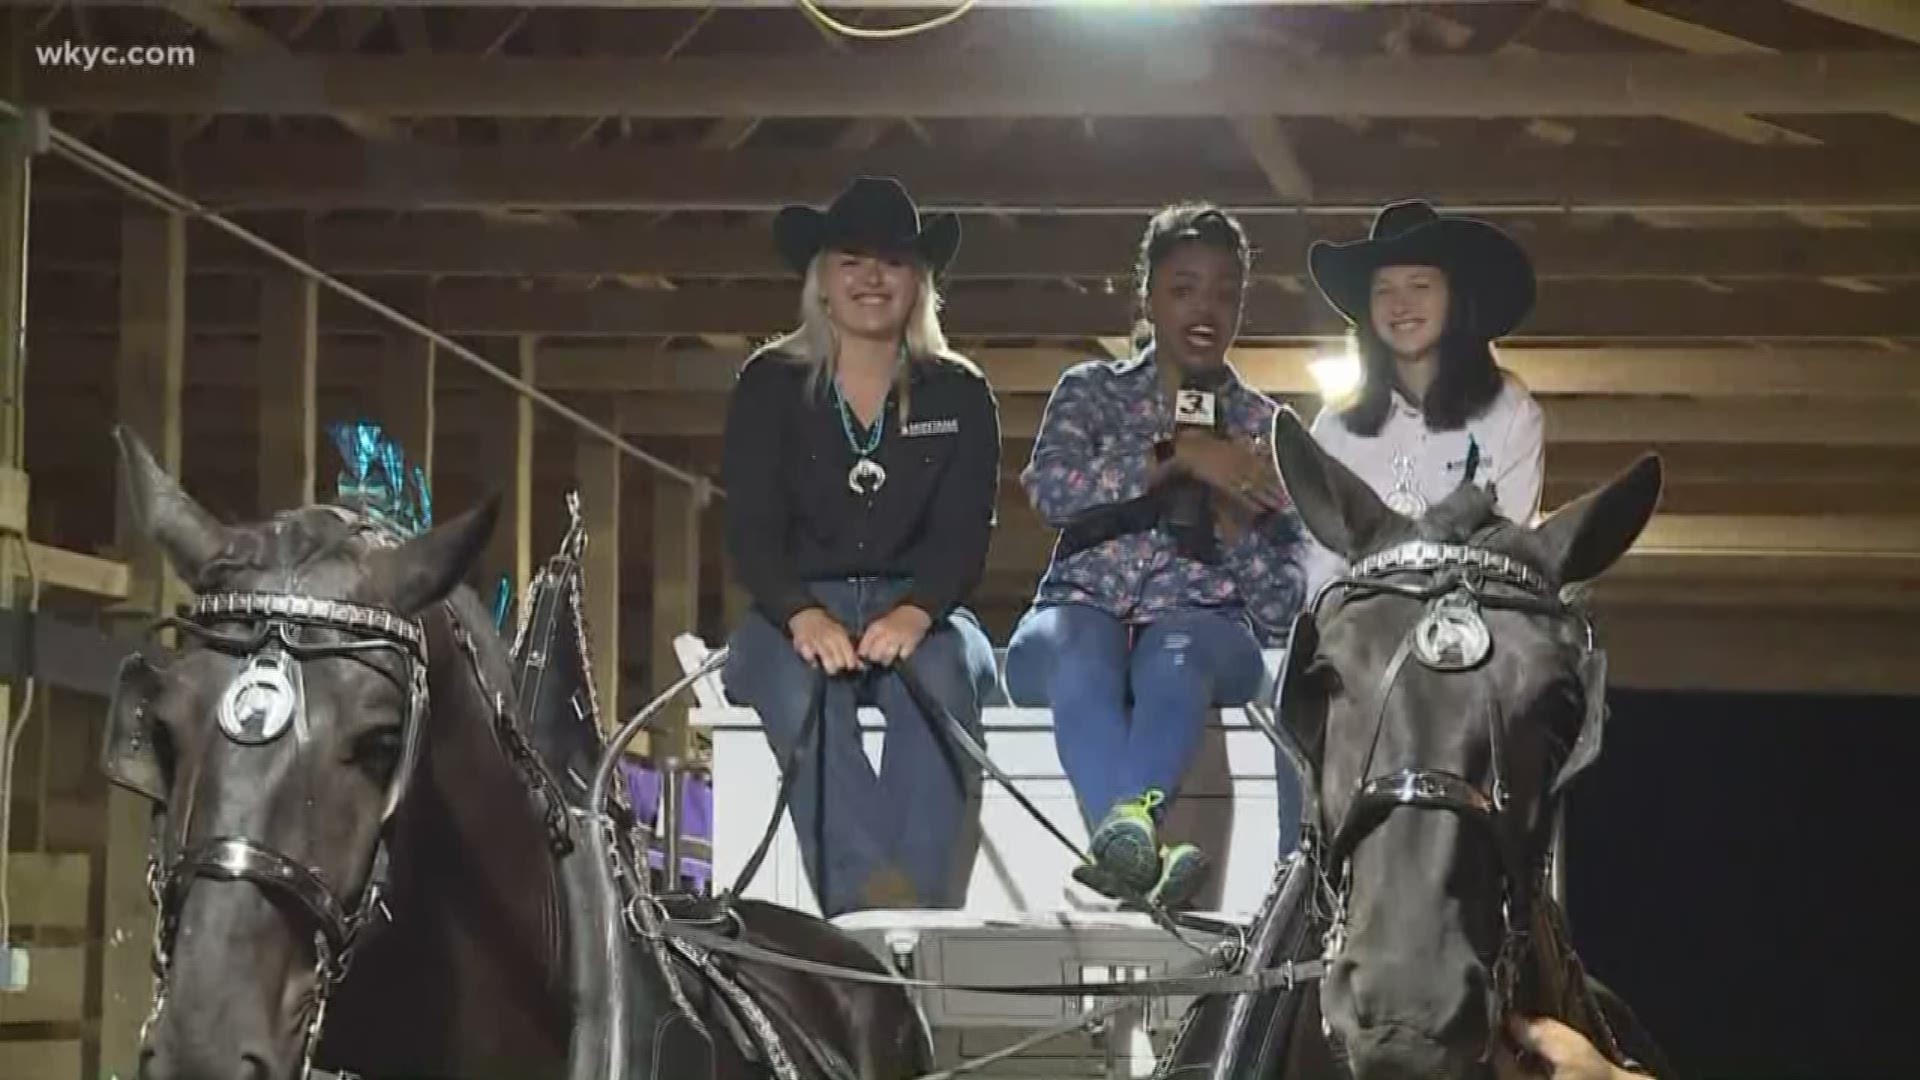 Aug. 30, 2018: It's that time of year again! The Geauga County Fair has arrived, and WKYC's Jasmine Monroe was given a ride on a horse-drawn carriage.